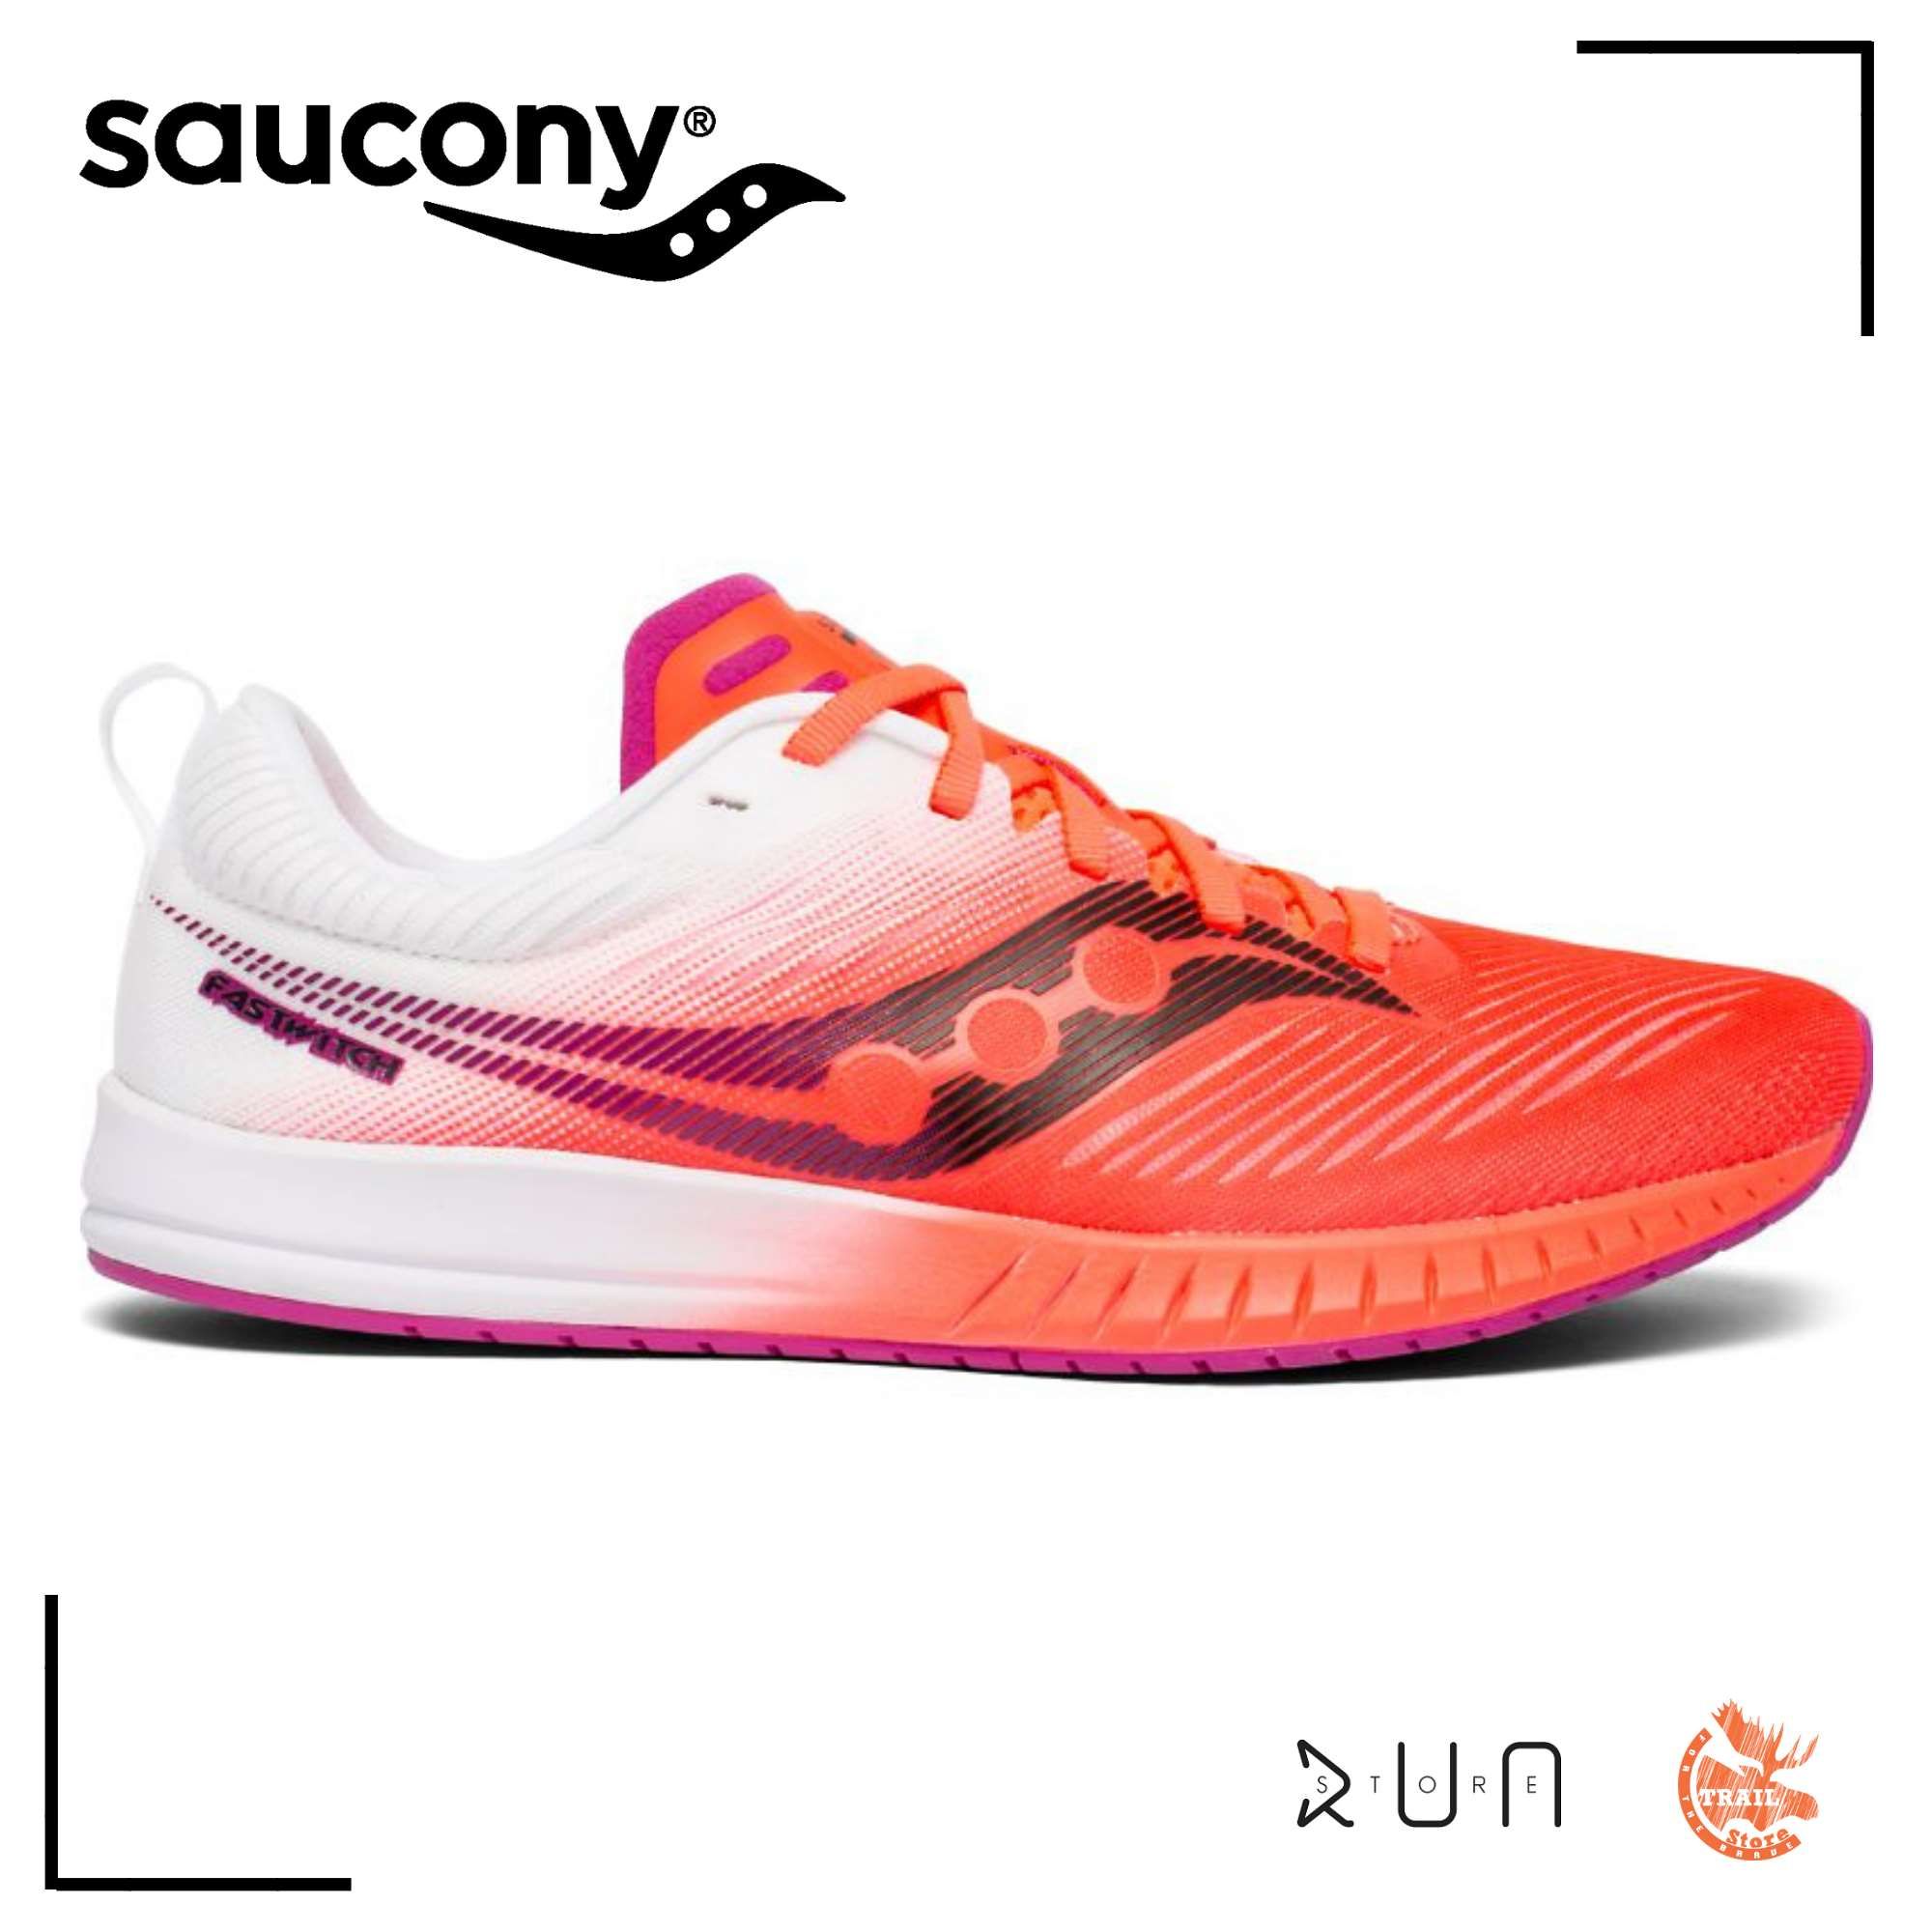 saucony fastwitch homme blanche